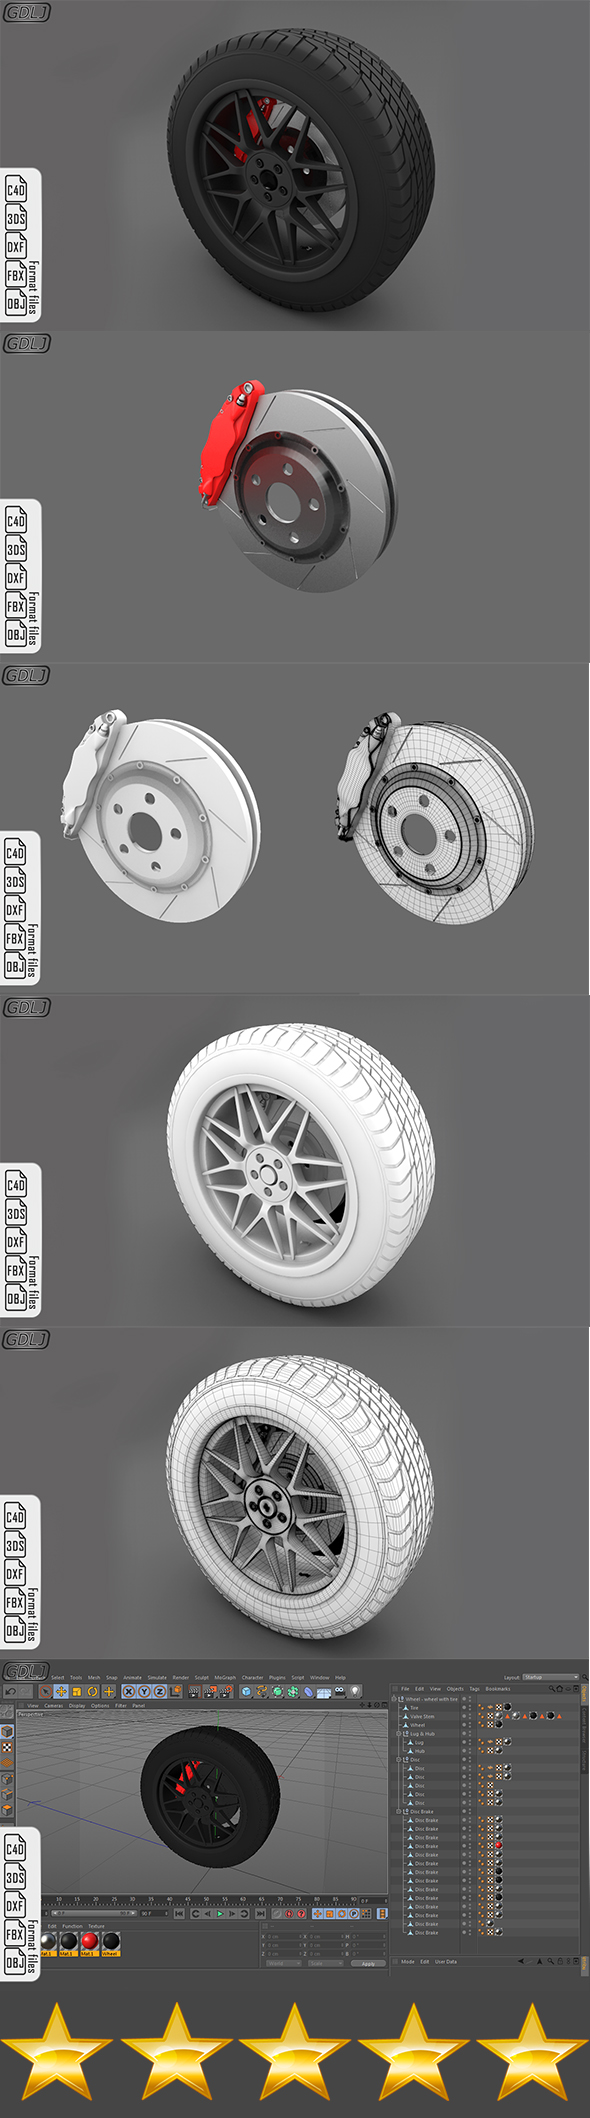 Wheel with tire - 3Docean 23078122